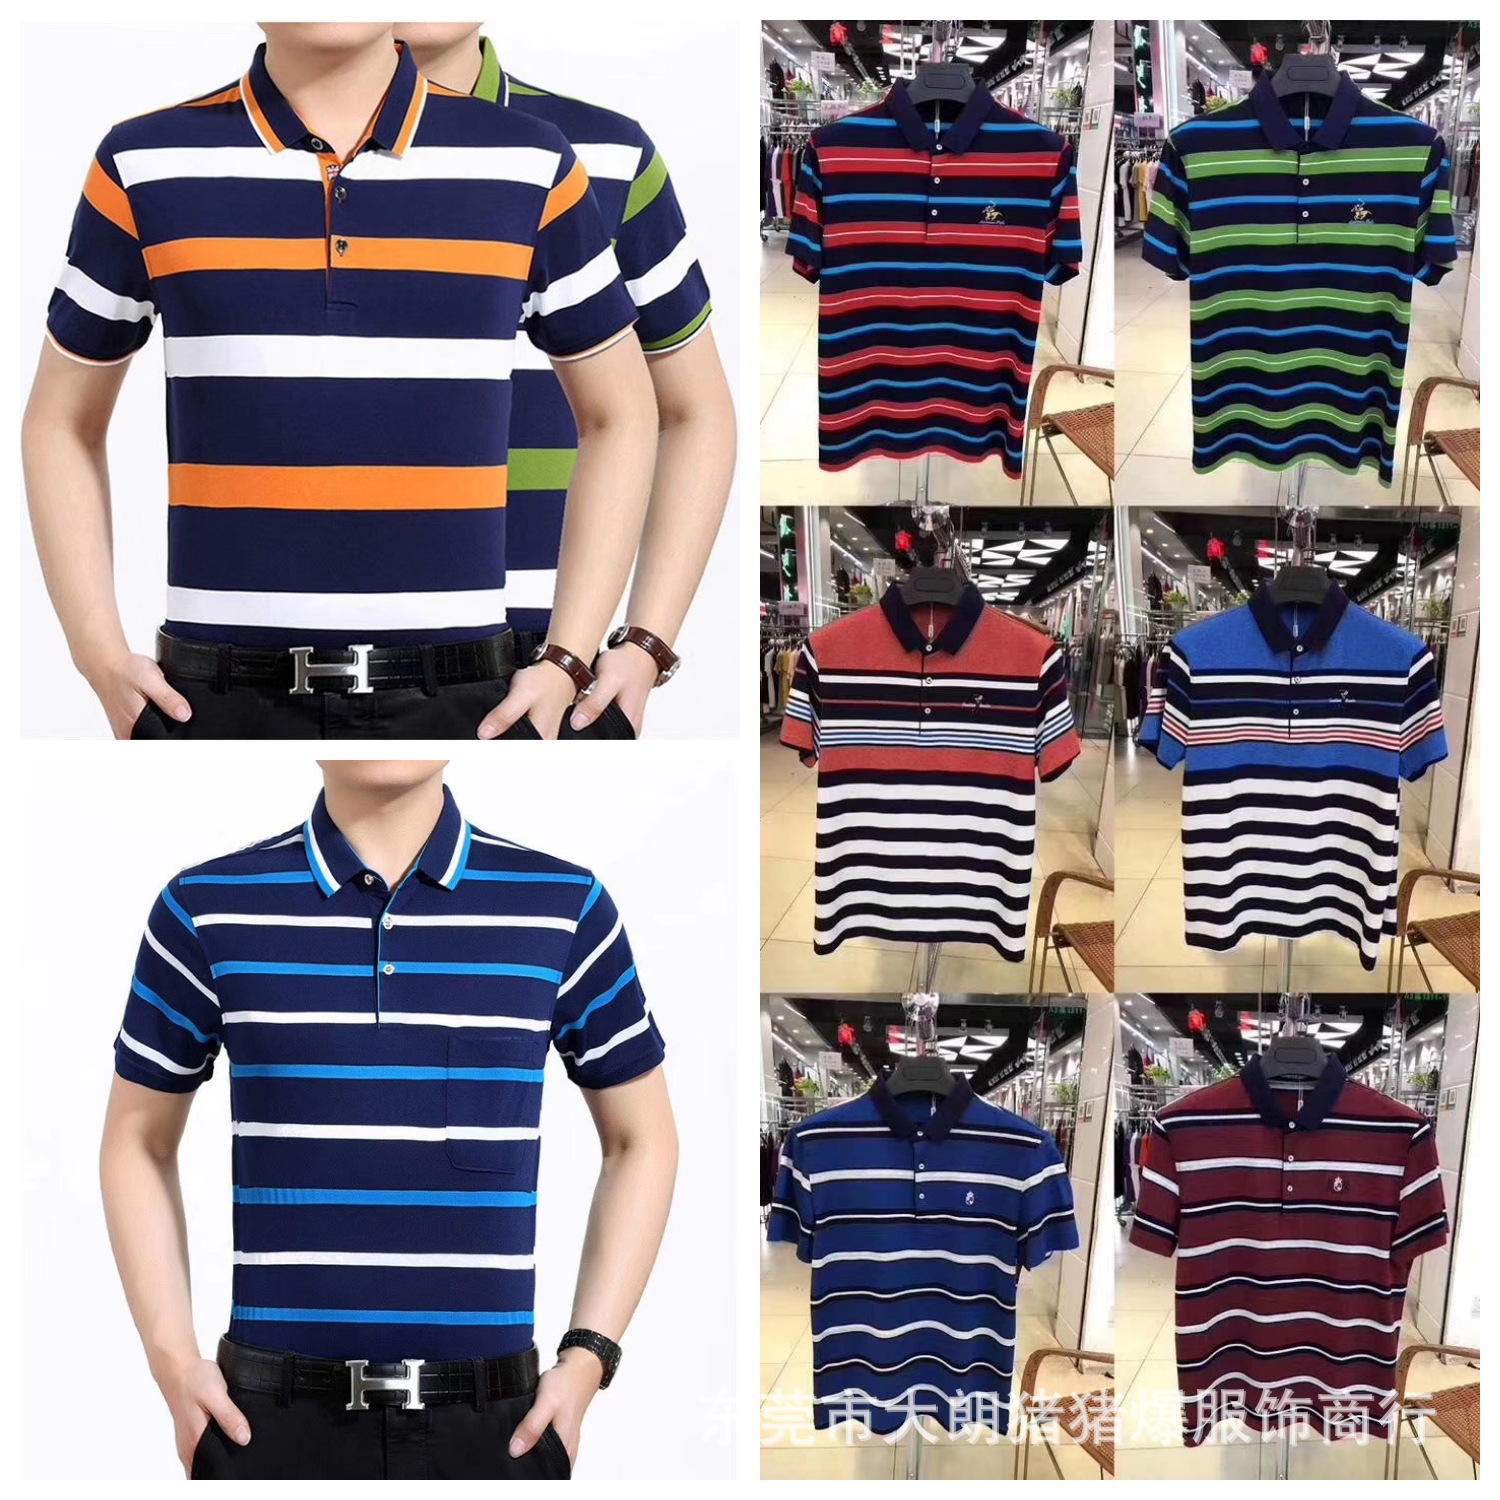 Men's Short Sleeved T-shirt Middle-Aged and Elderly Men's Striped Lapel Short Sleeved T-shirt Shirt 1688 Dad Summer Polo Shirt Men's T